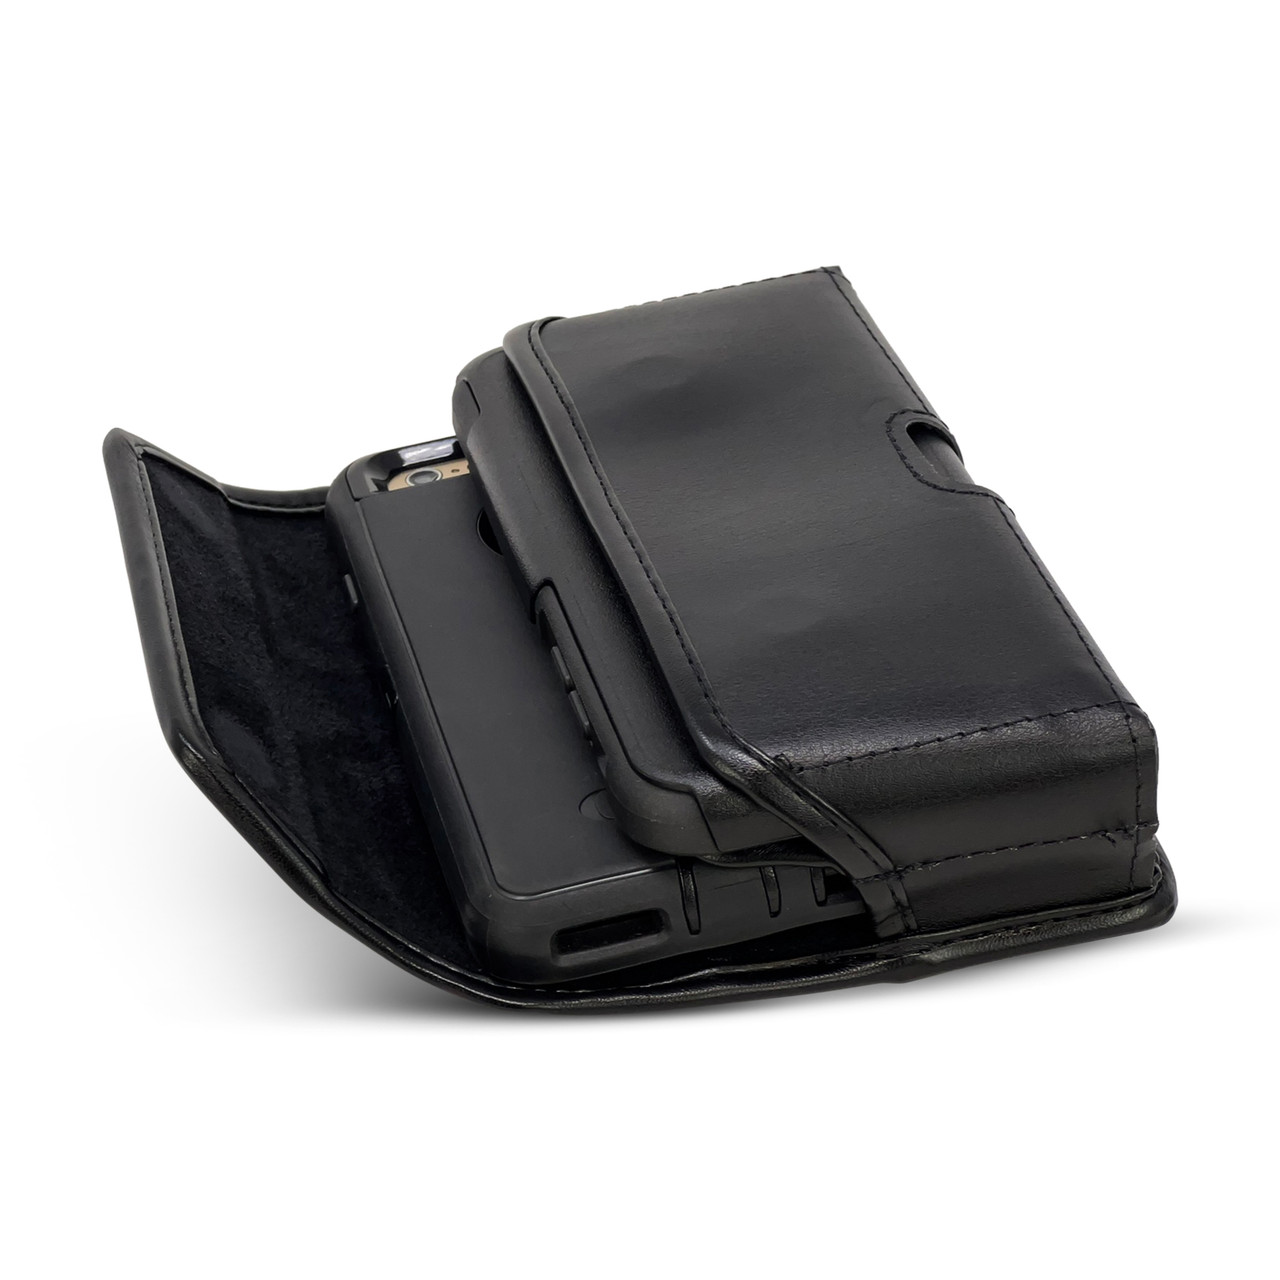 USA Made Dual Phone Holster Carries 2 LARGE Phones - Horizontal Black  Leather Belt Pouch with Executive Belt Clip, Made in USA